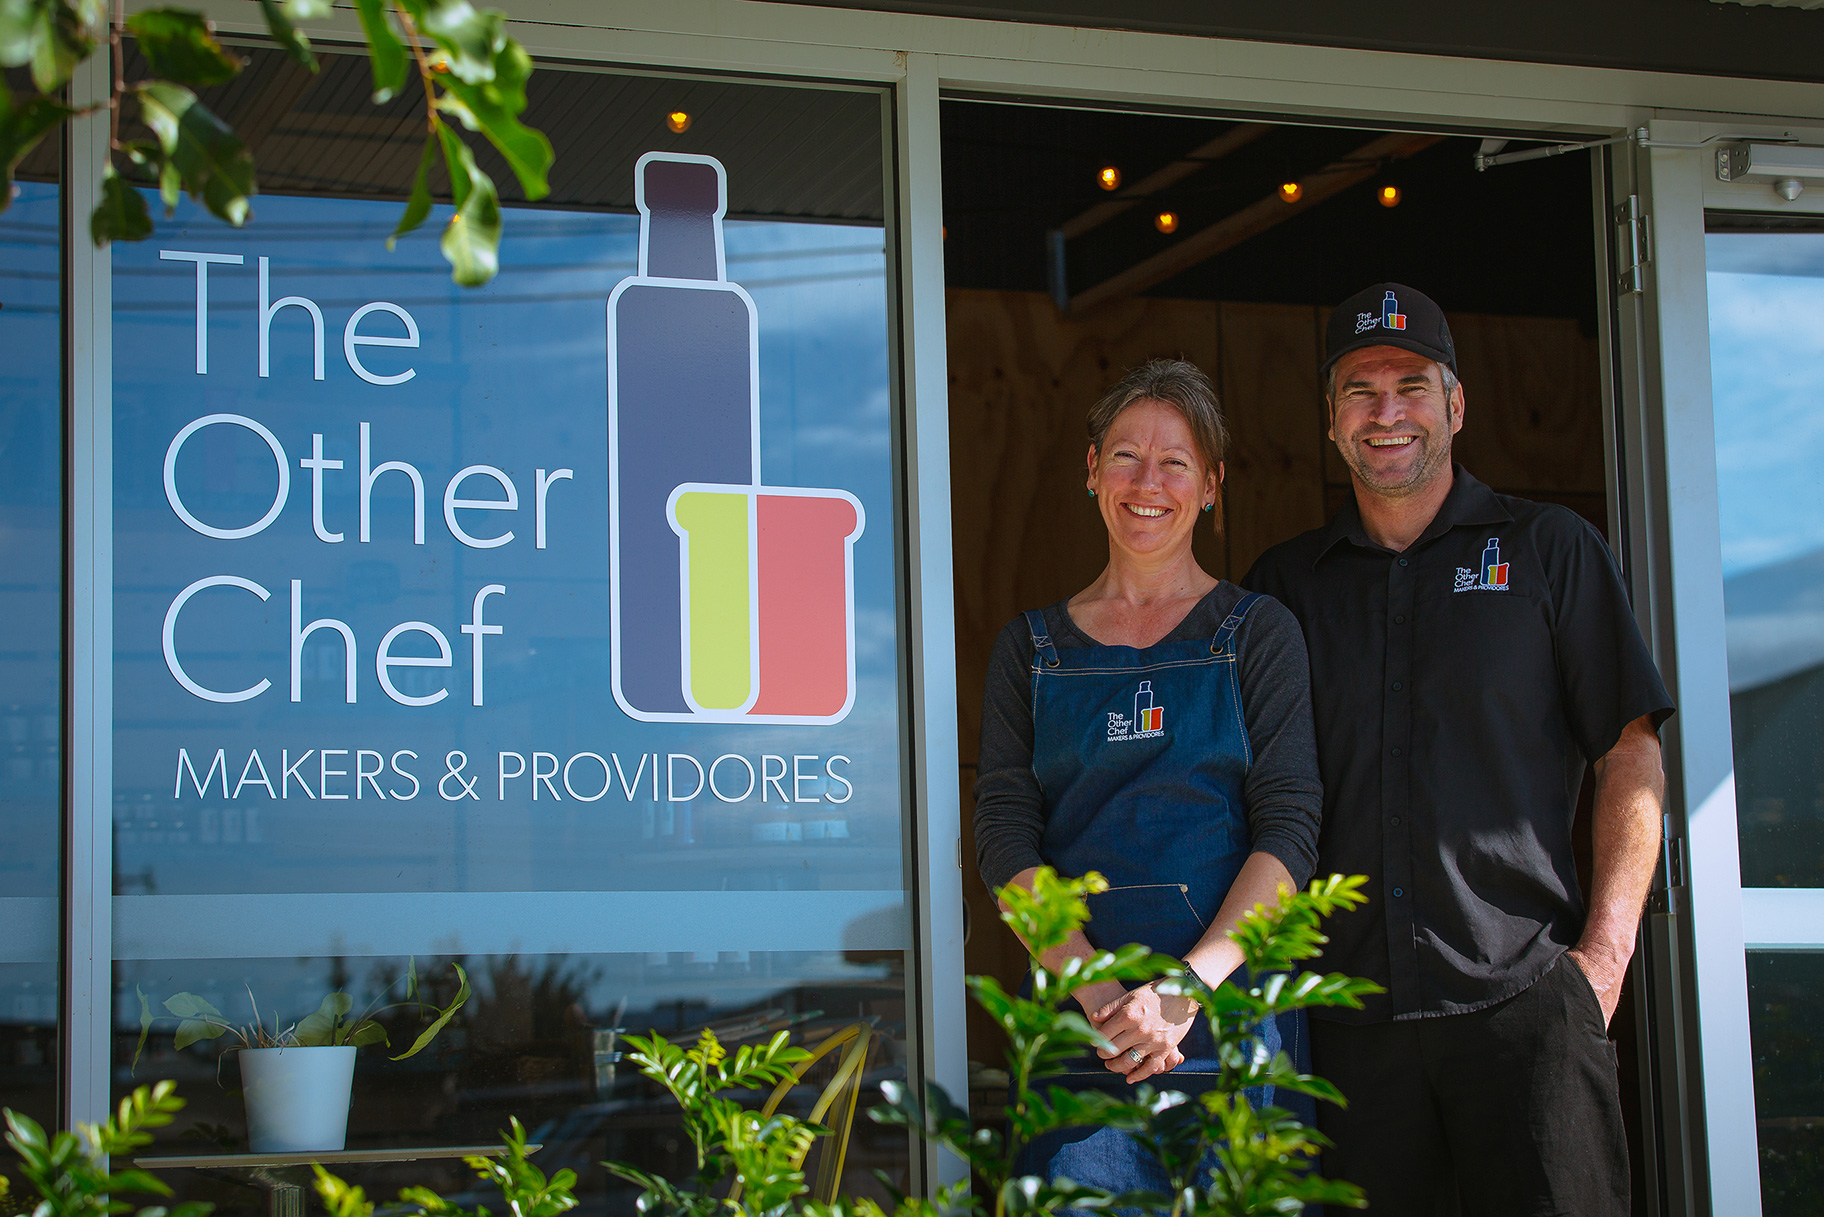 Meet Port Macquarie-based The Other Chef Makers & Providores